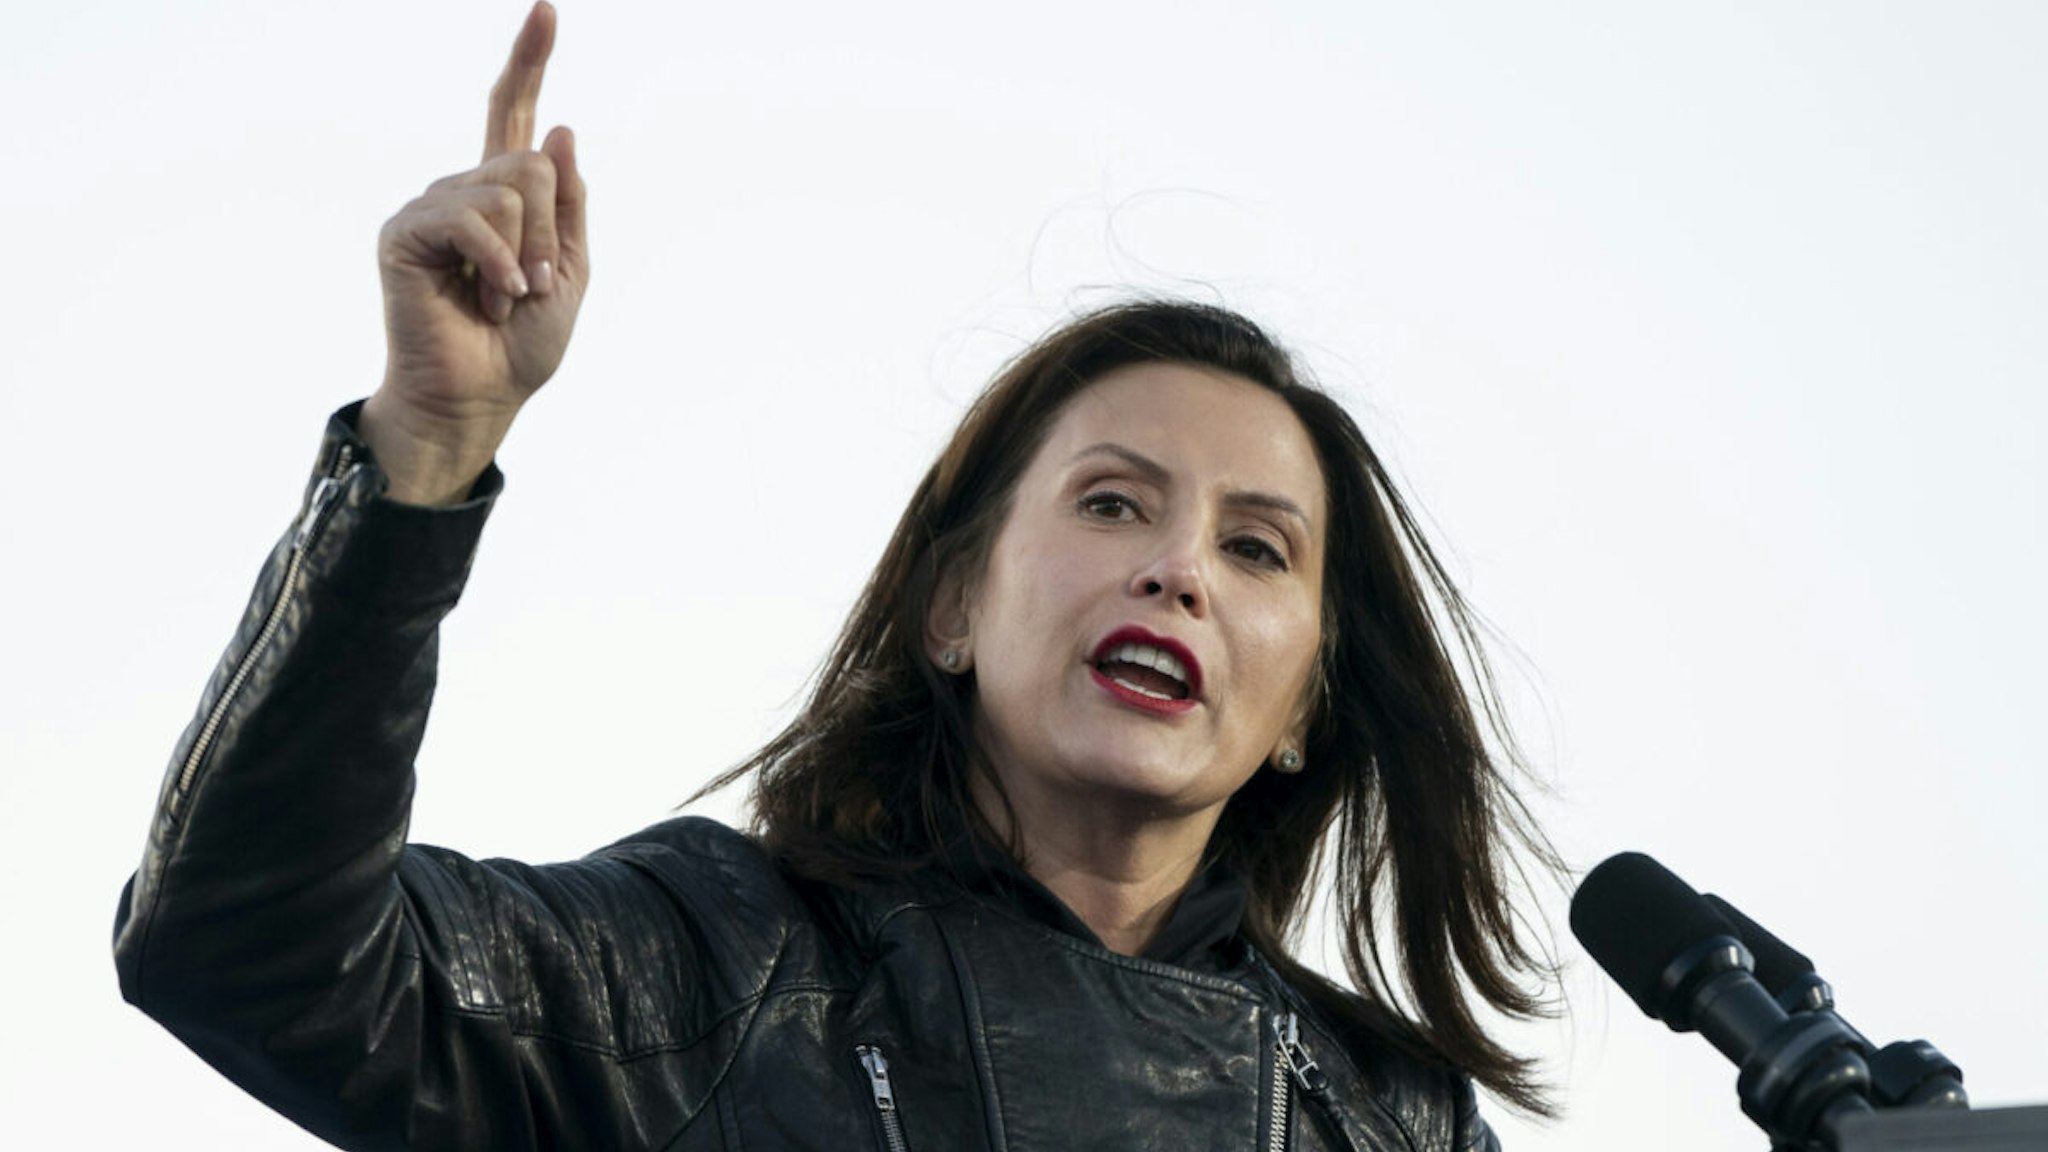 Gov. Gretchen Whitmer speaks during a drive-in campaign rally with Democratic presidential nominee Joe Biden and former President Barack Obama at Belle Isle on October 31, 2020 in Detroit, Michigan